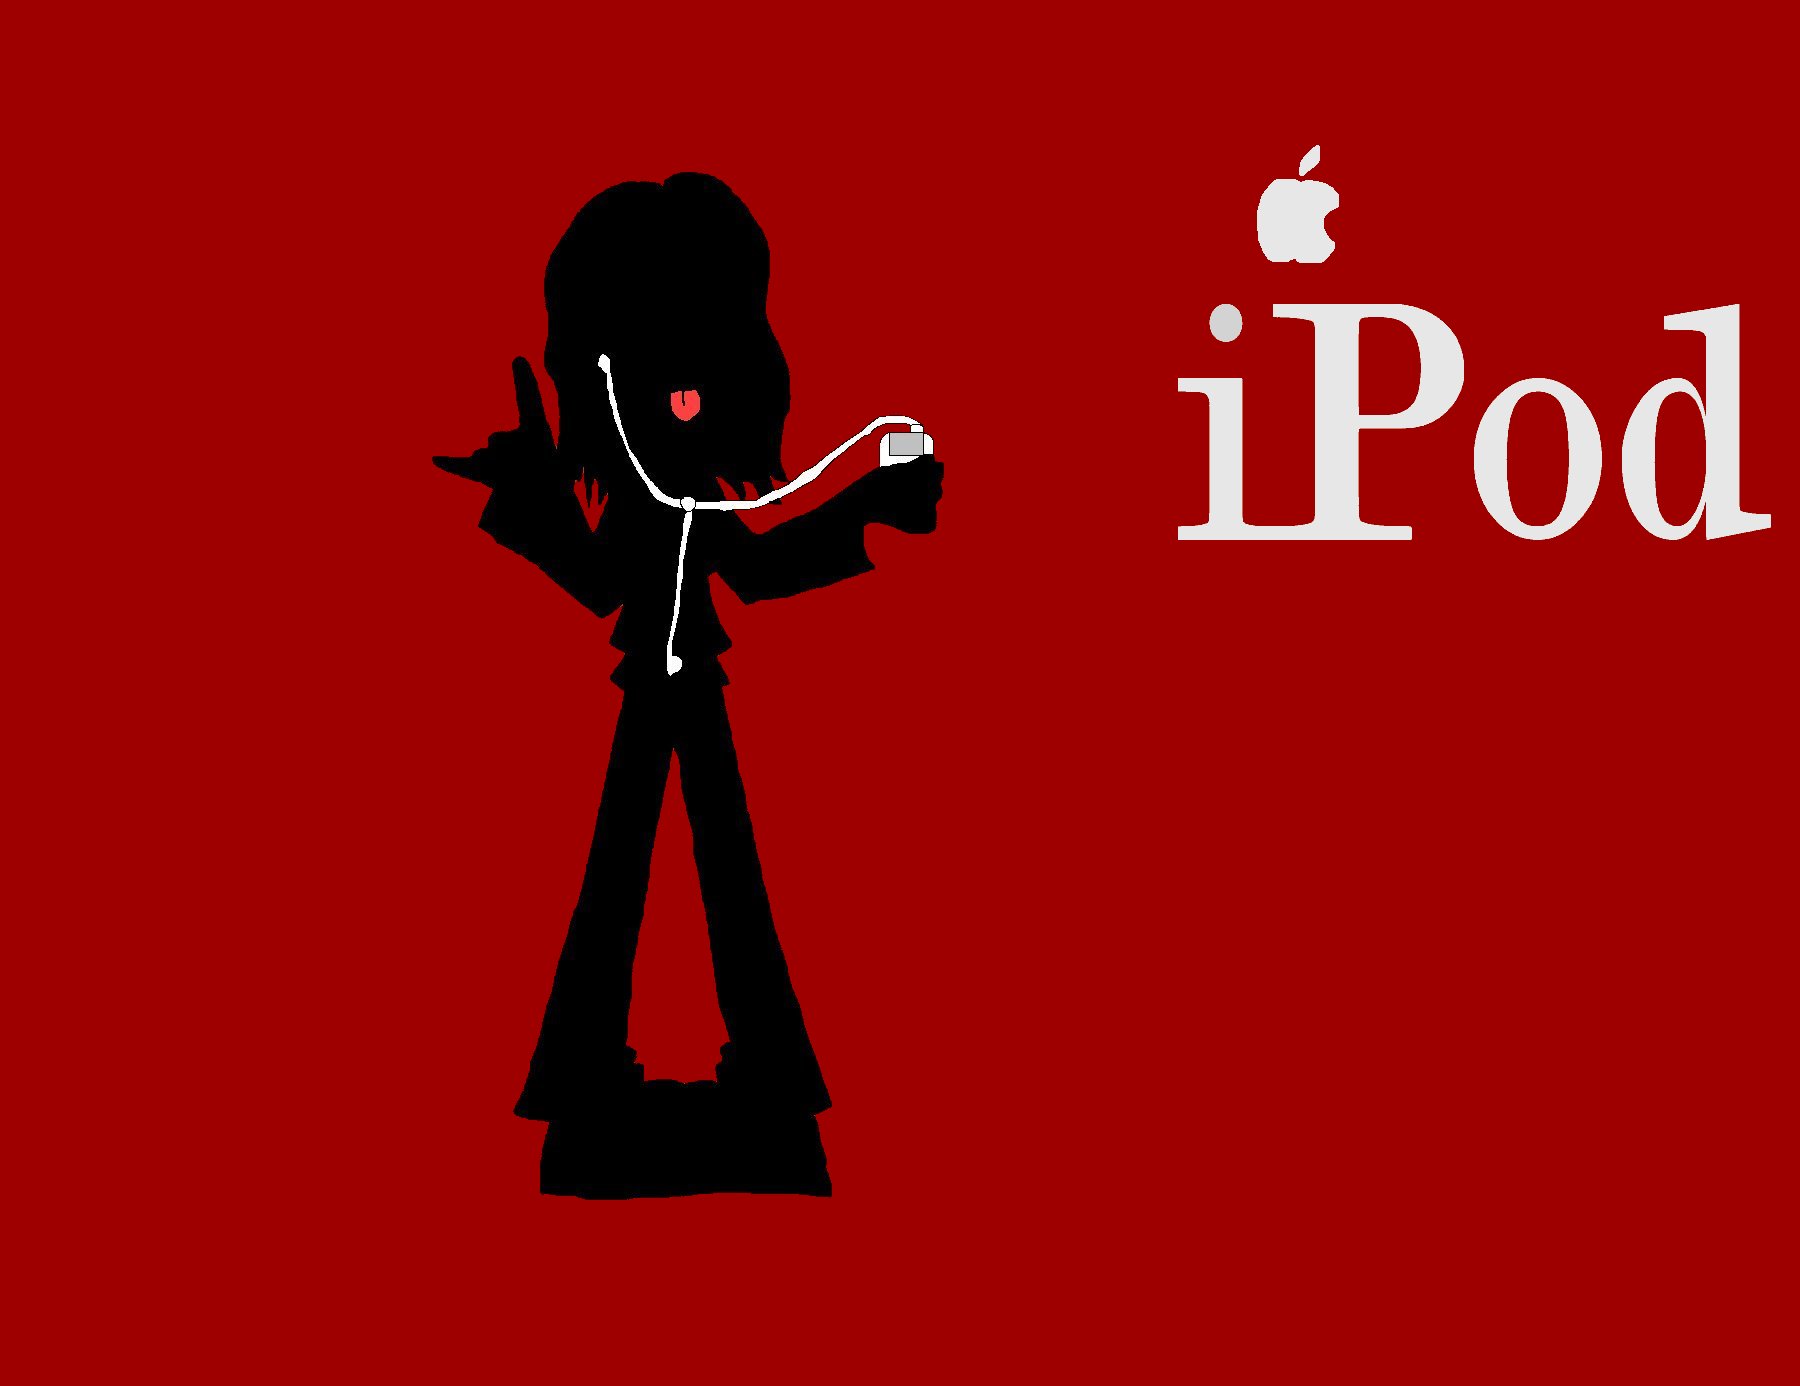 ipod series 1 by CrAzY_fish101